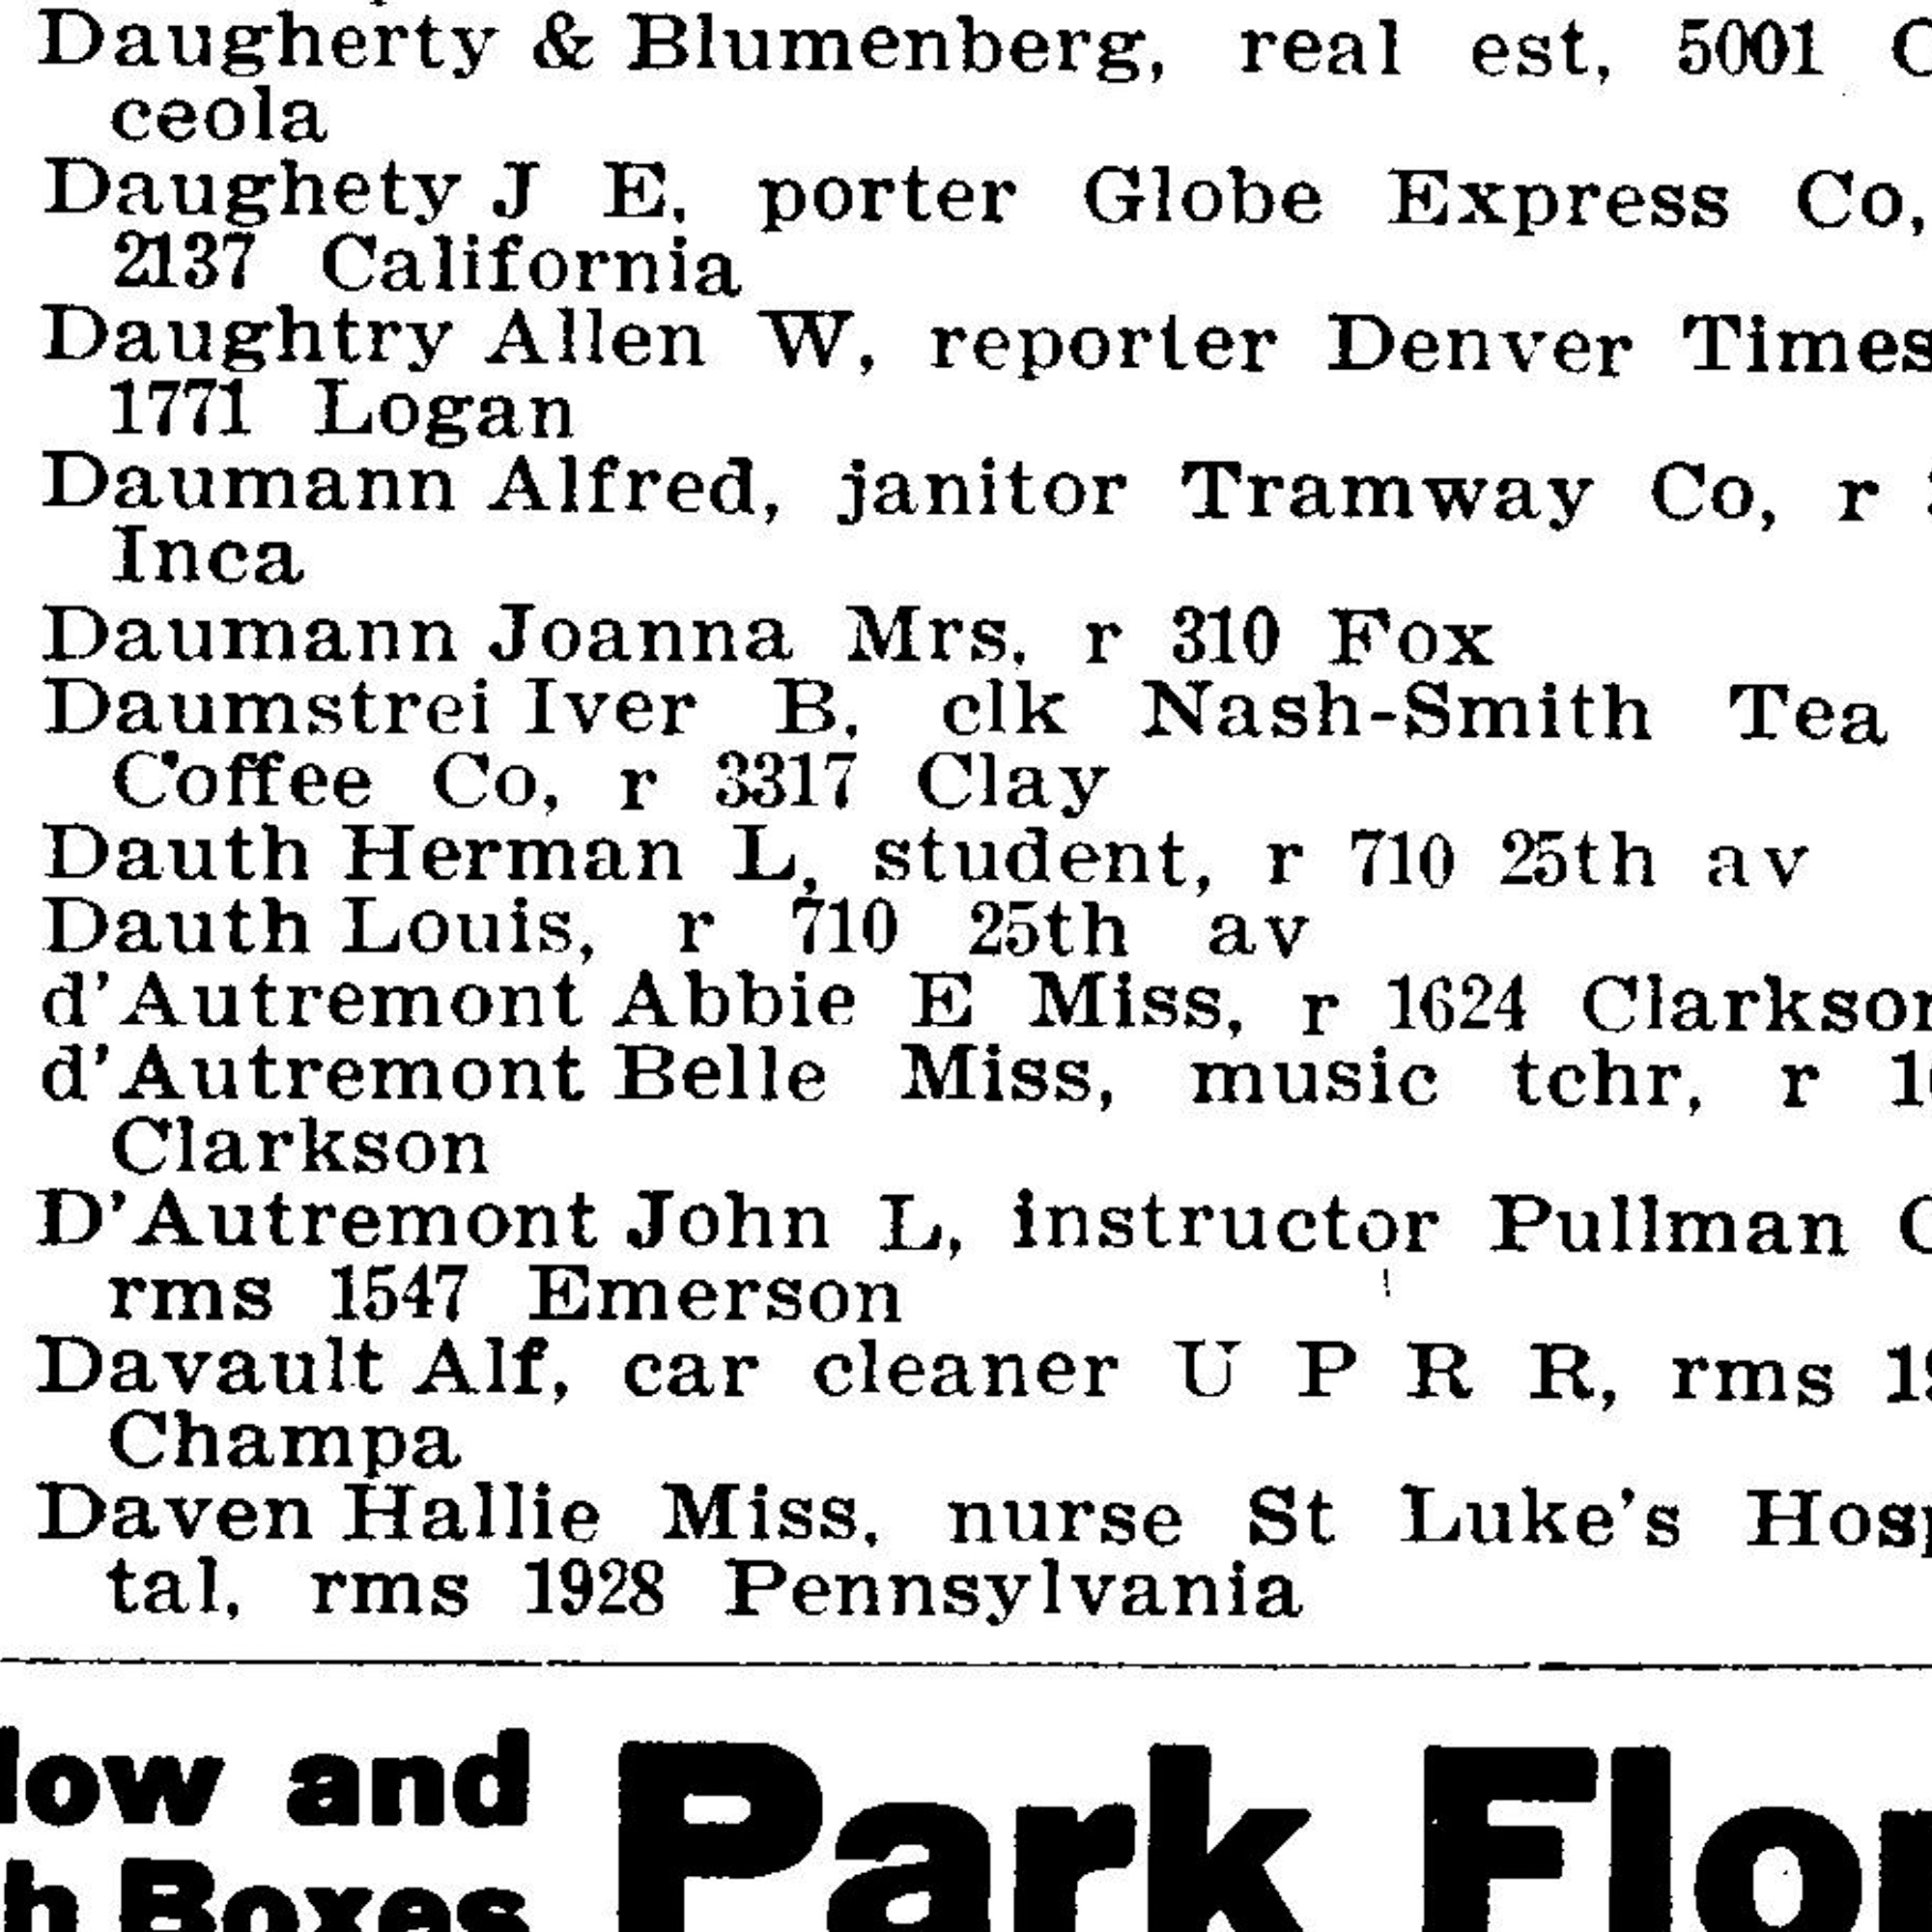 Dauth Family Archive - 1911 - Denver Directory - Entry For Louis and Herman Dauth